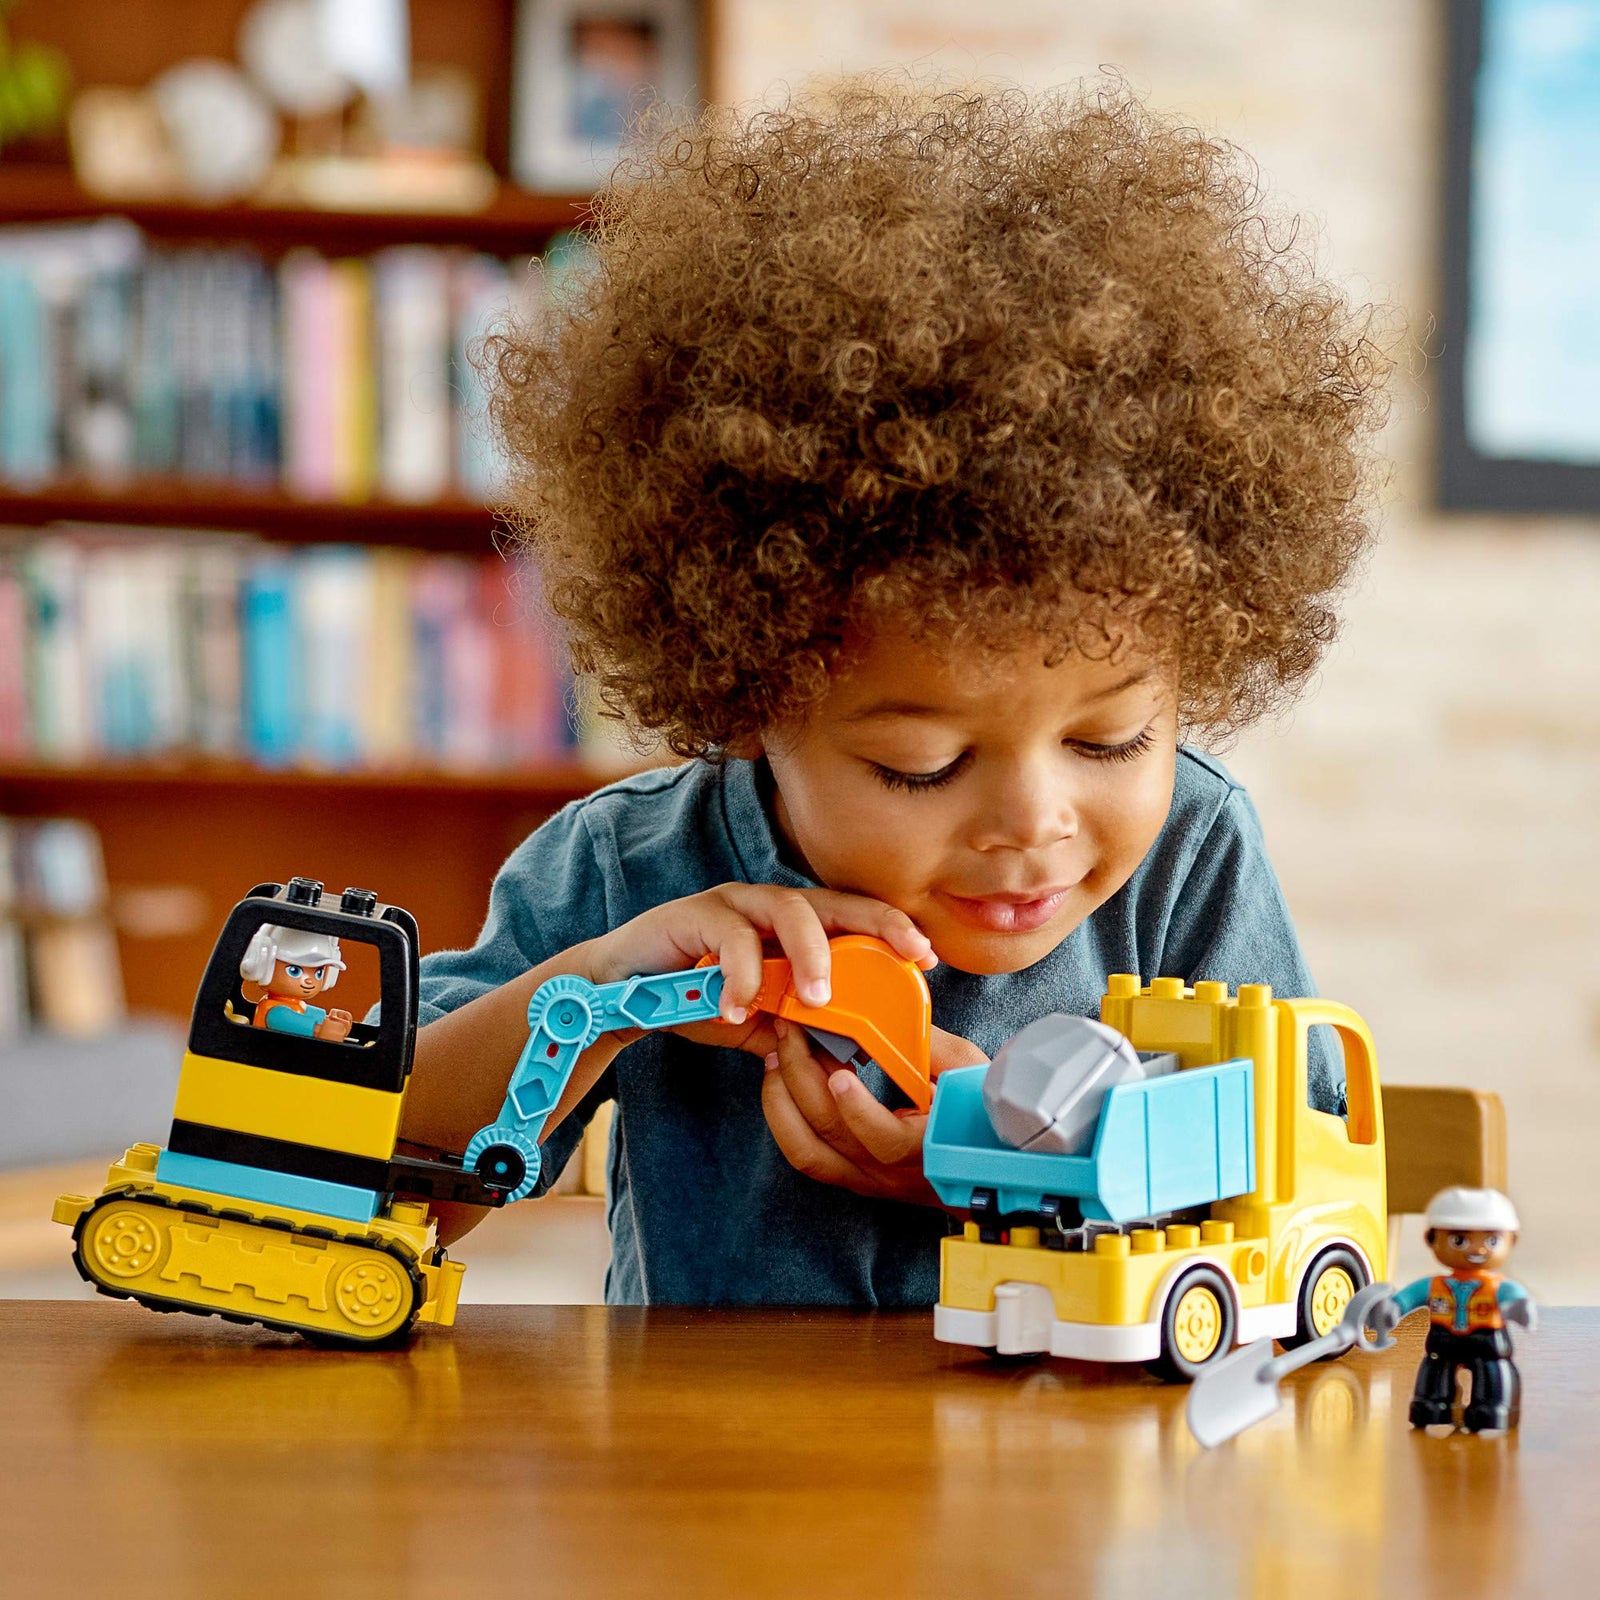 LEGO DUPLO Construction Truck & Tracked Excavator 10931 Building Site Toy for Kids Aged 2 and Up; Digger Toy and Tipper Truck Building Set for Toddlers, New 2020 (20 Pieces)